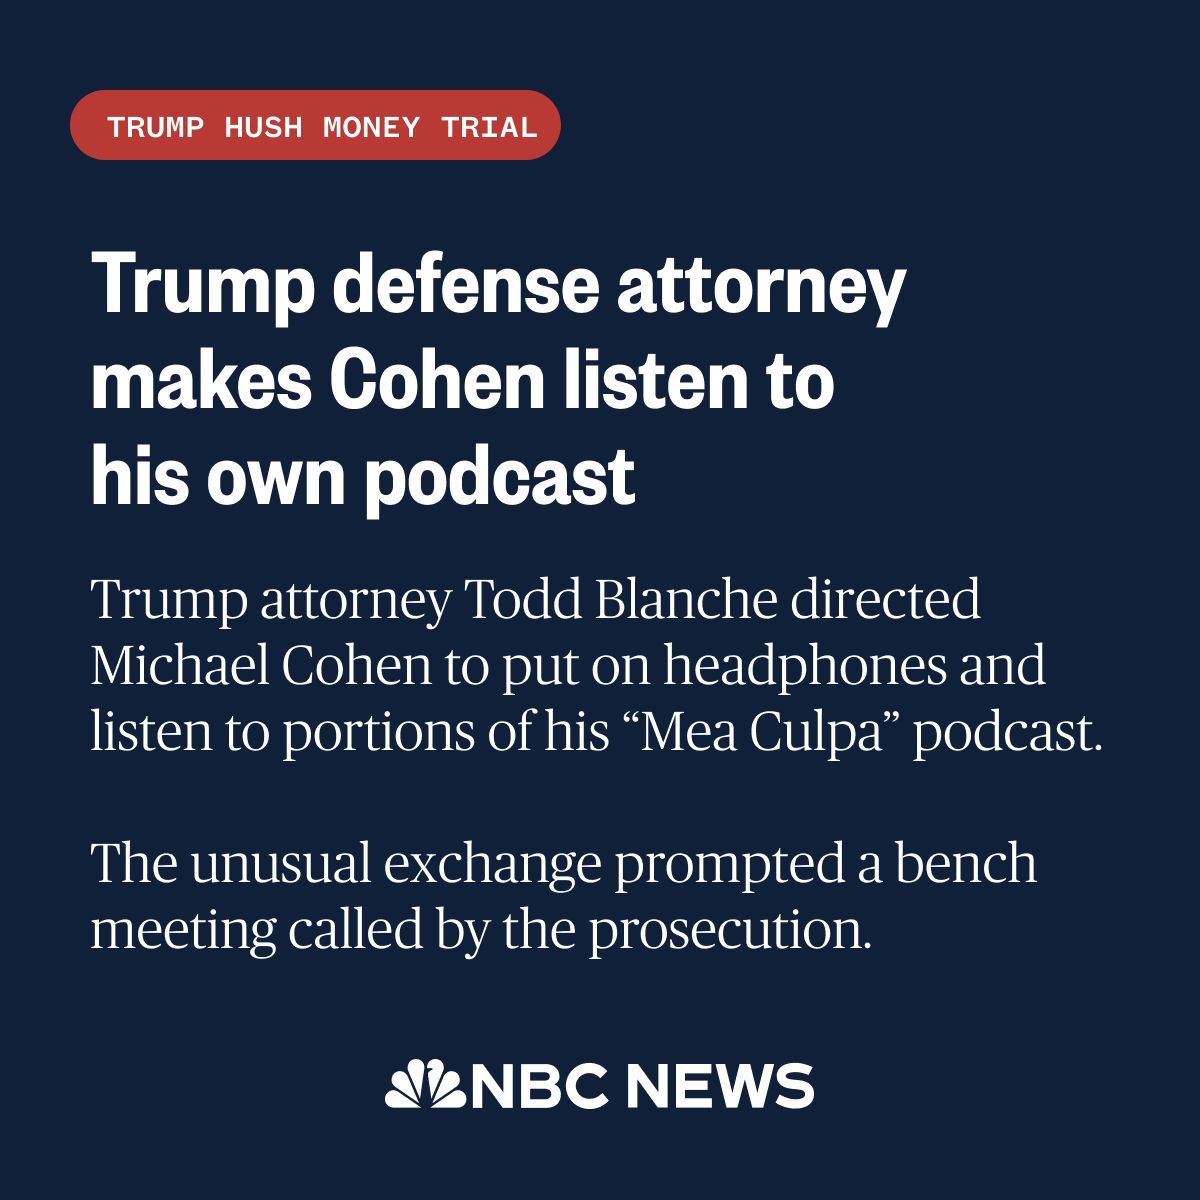 Trump attorney Todd Blanche directed Michael Cohen to put on headphones and listen to portions of his “Mea Culpa” podcast. “I would like to play a portion of the 'Mea Culpa' podcast from Oct. 23,” Blanche said. nbcnews.to/3UAKBrg